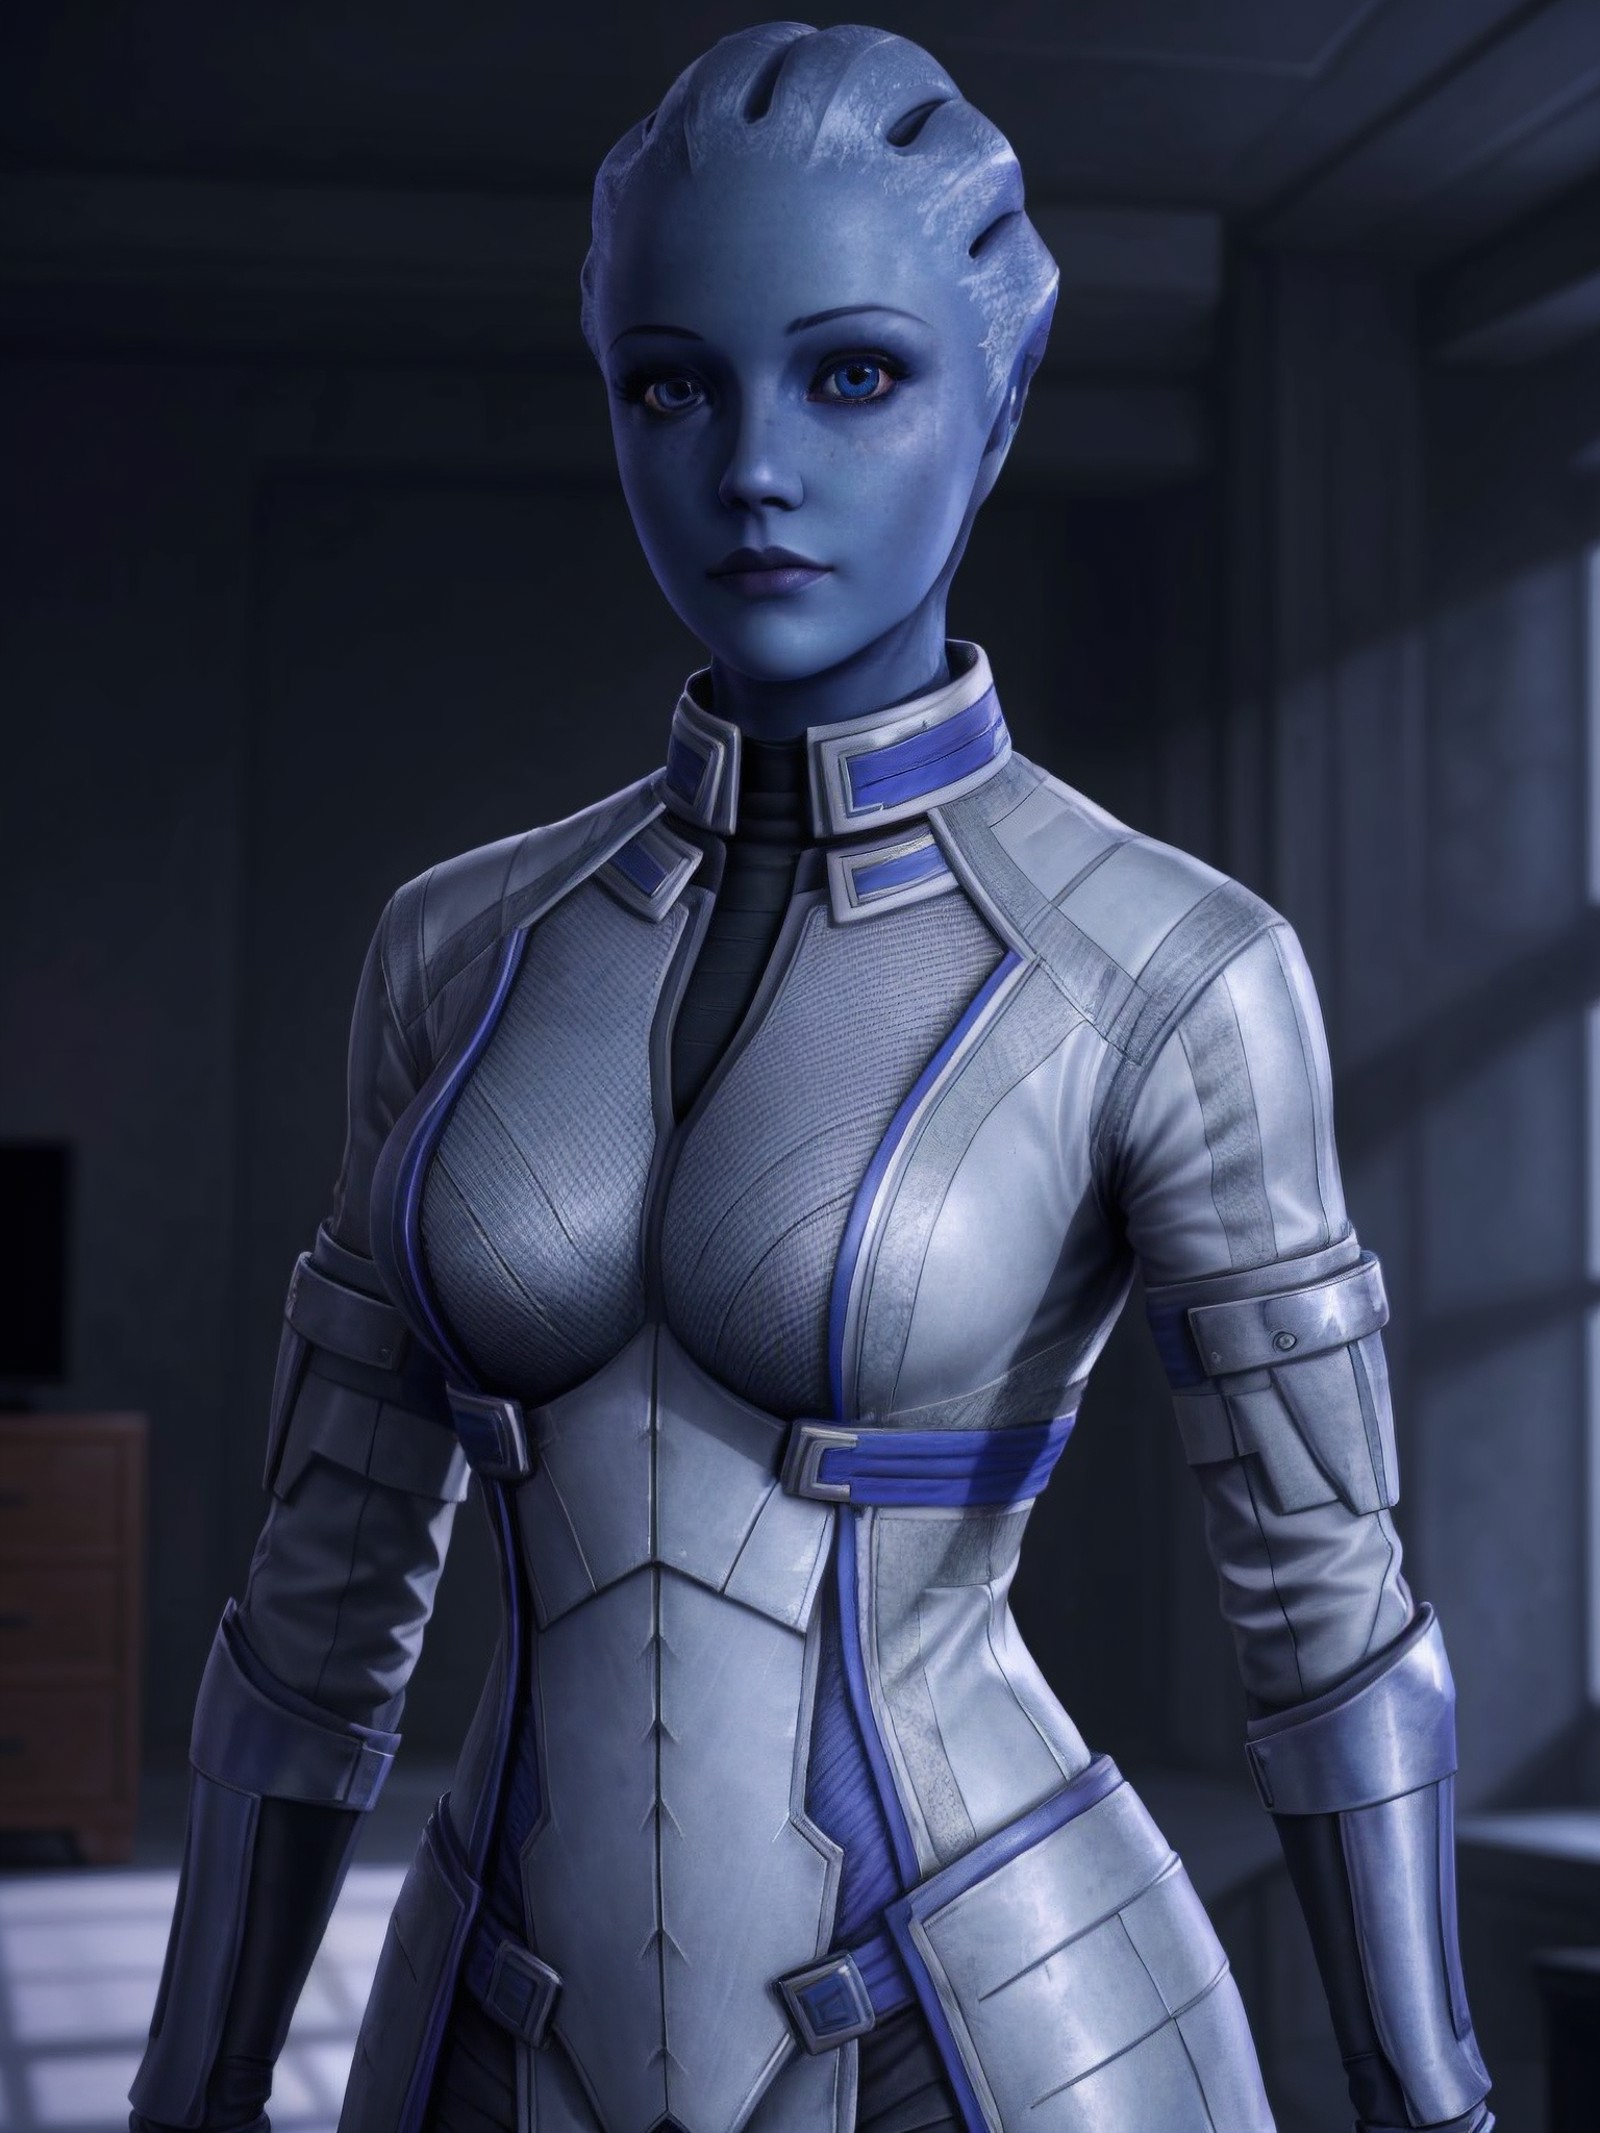 masseffectliara standing in a room, cute face, realistic armor materials, shiny armor, dramatic lighting, wallpaper, intri...